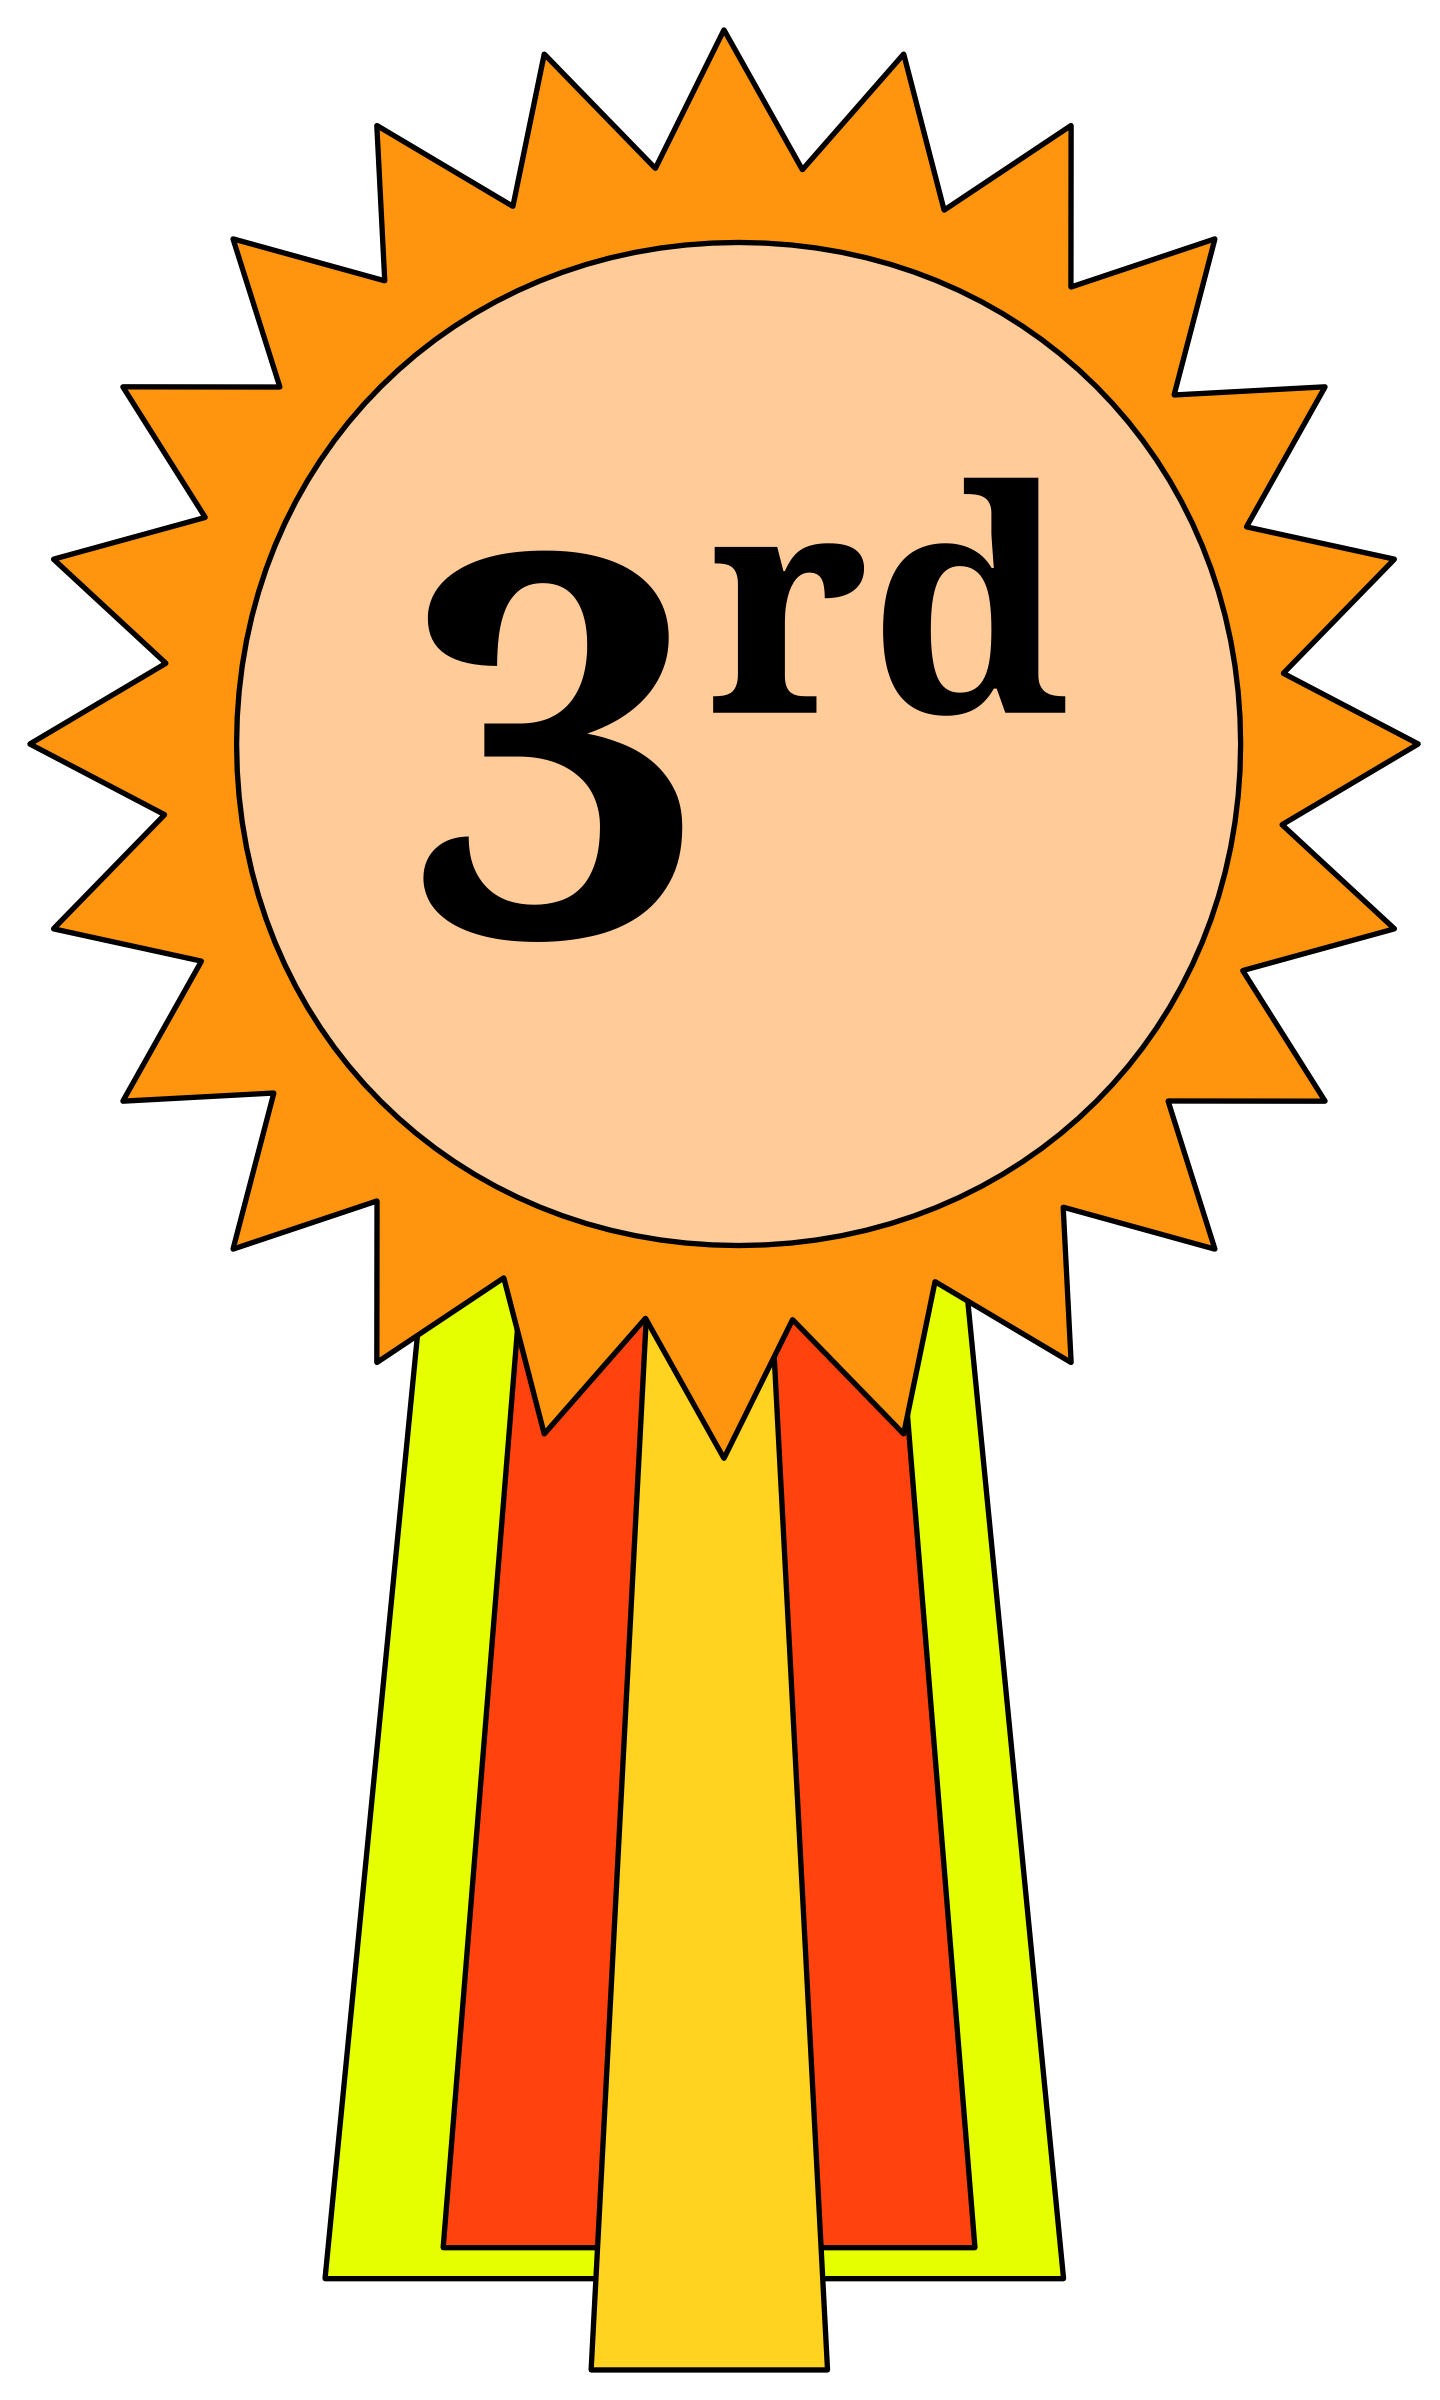 3rd Place Trophy Clipart 